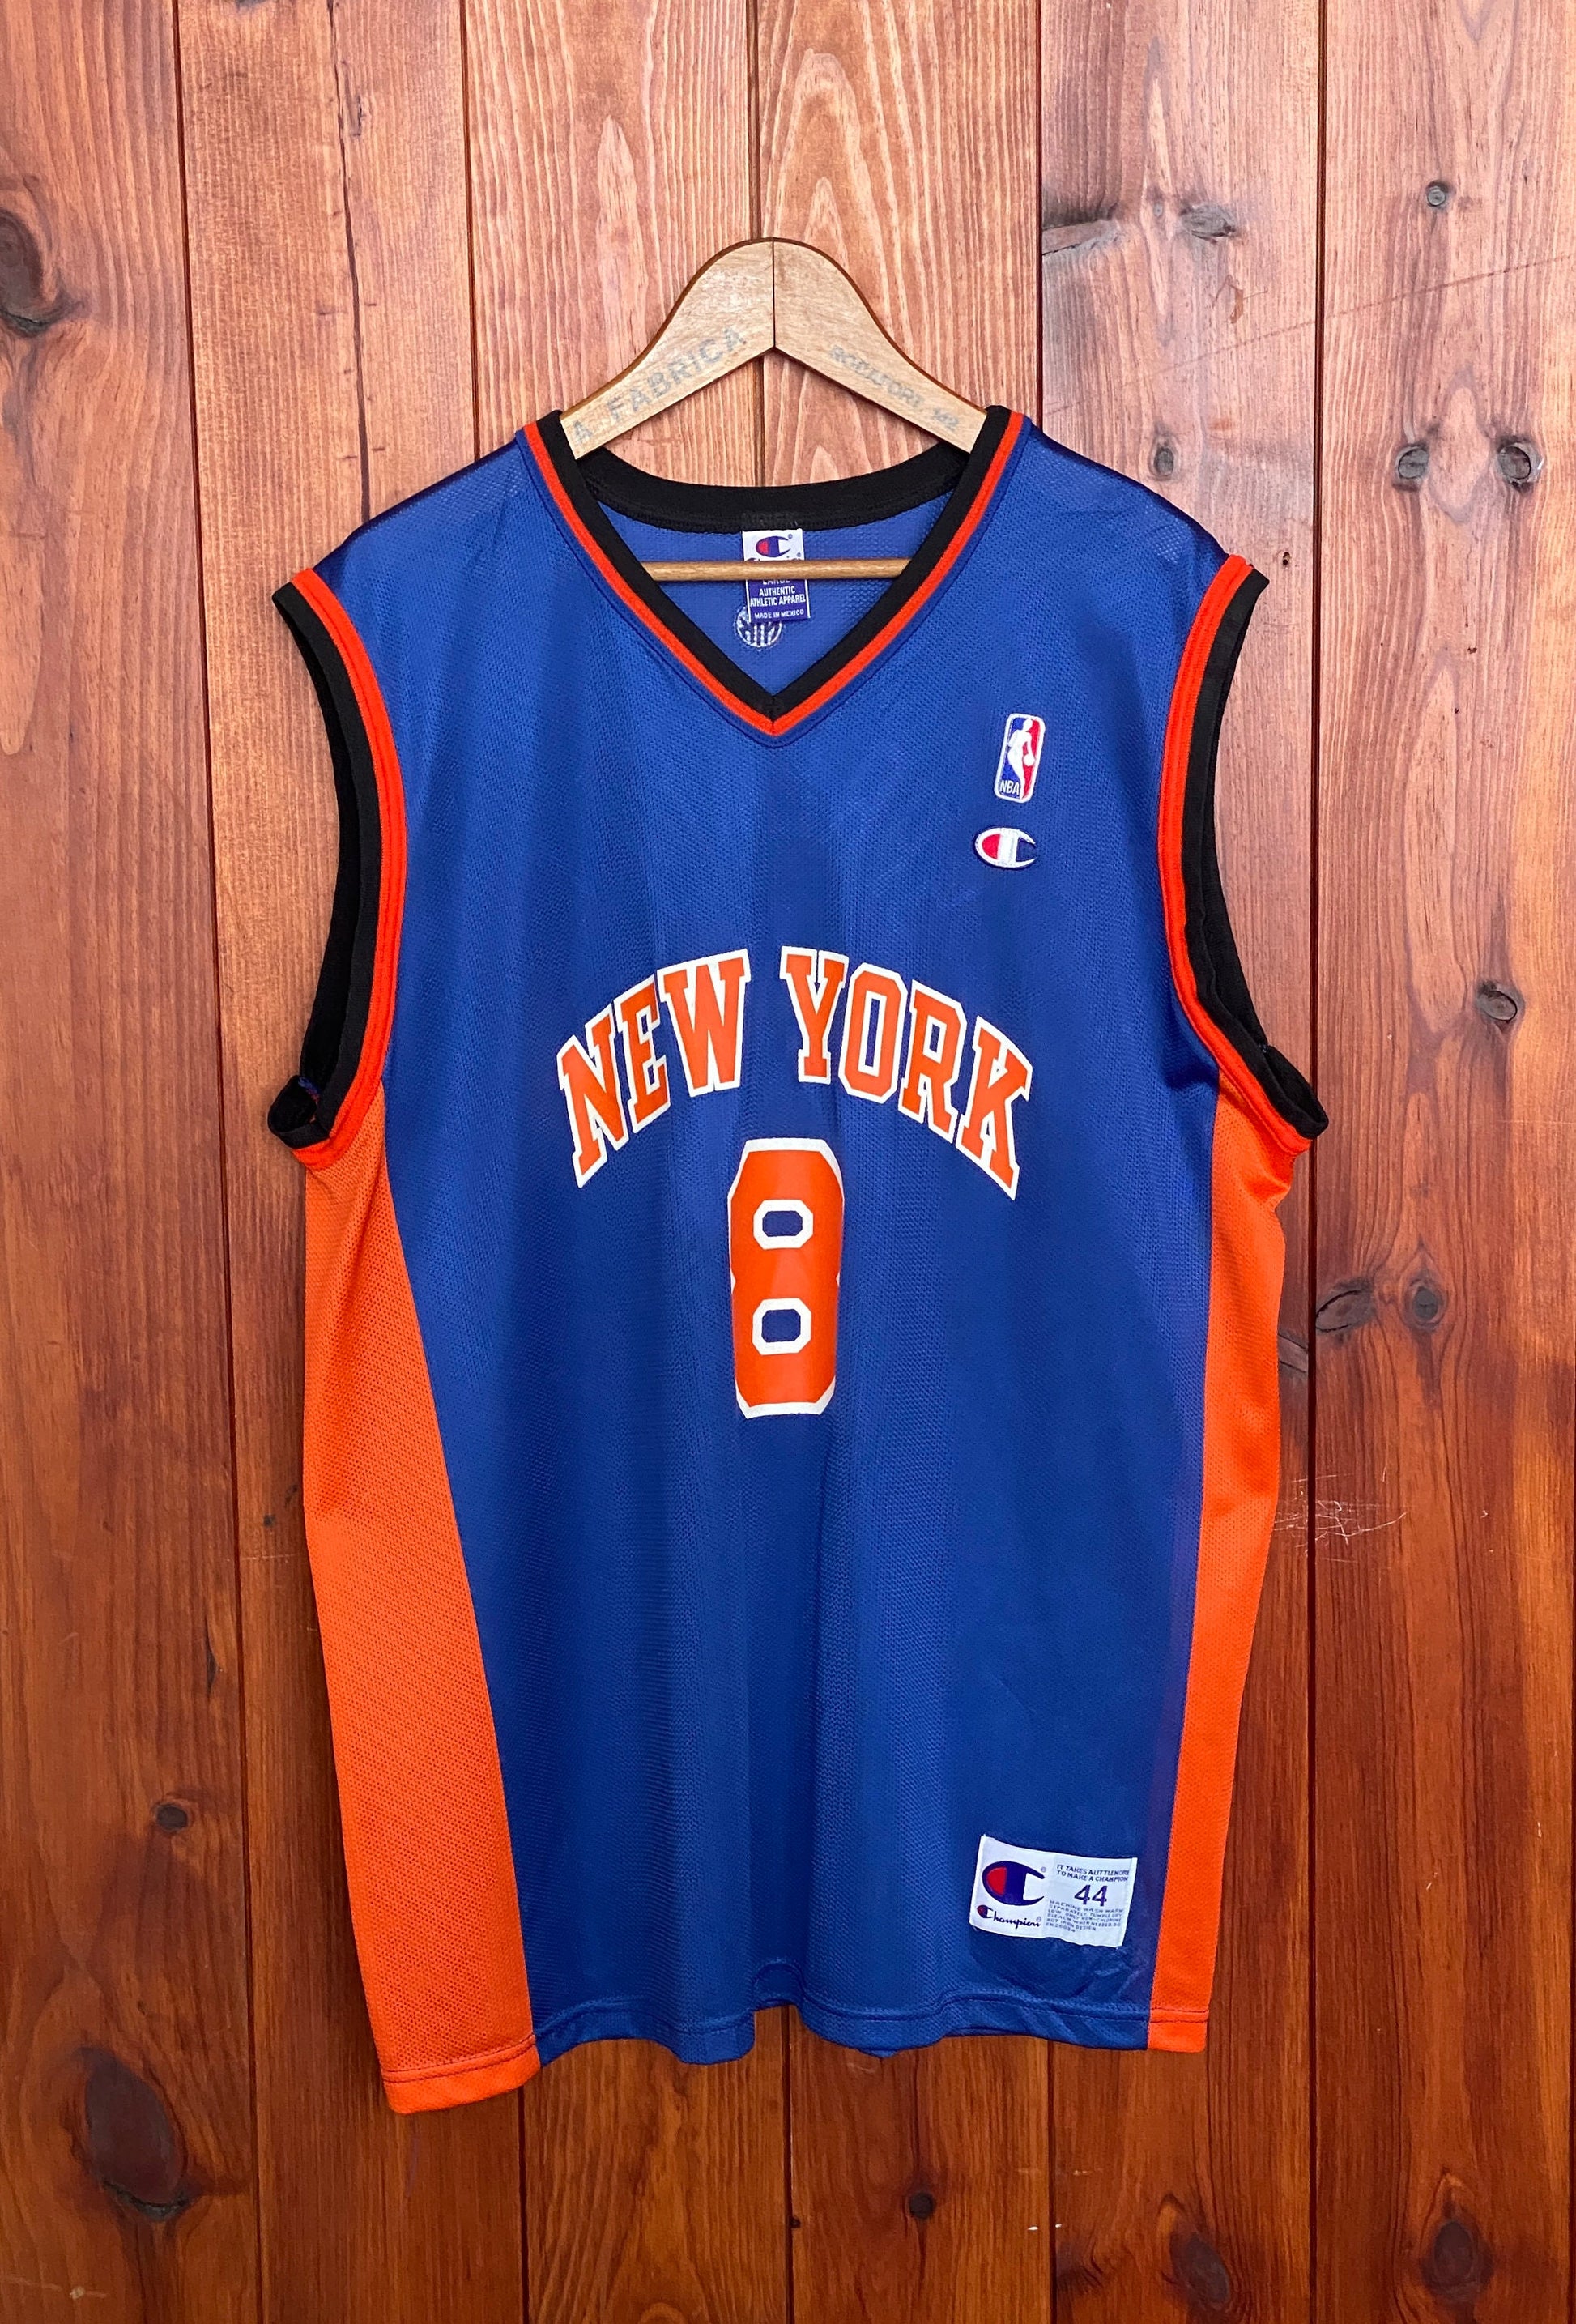 Vintage 90s Champion New York Knicks Latrell Sprewell #8 NBA jersey, size 44 - front view.